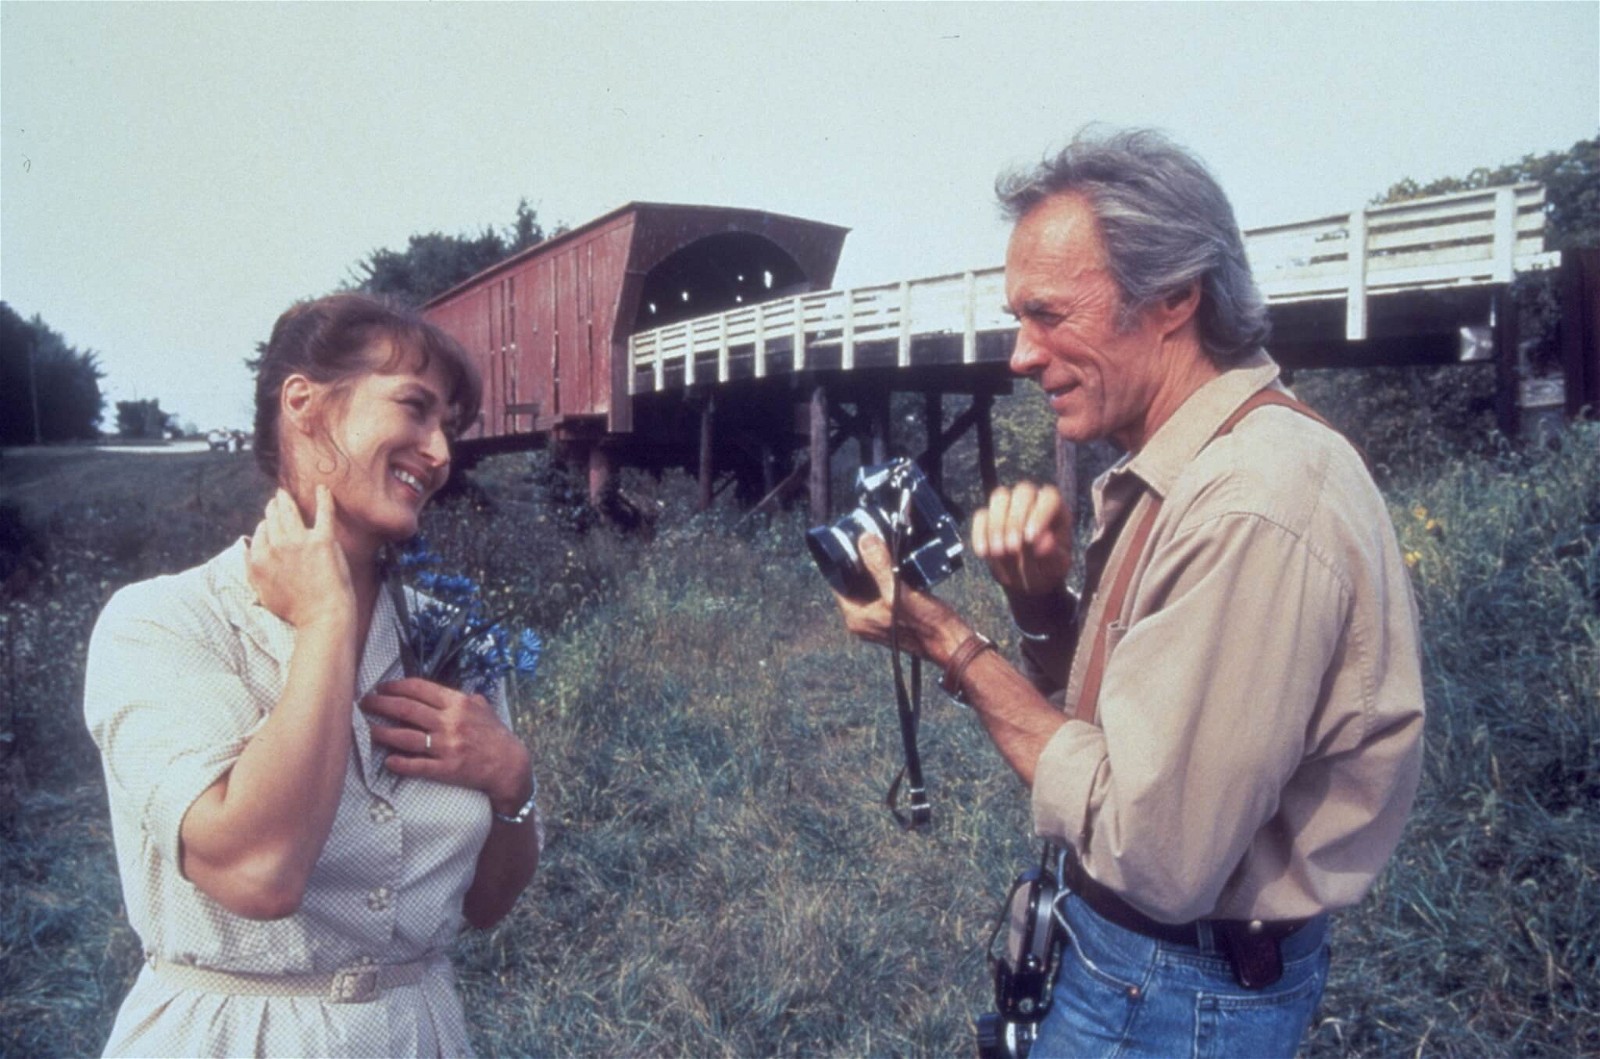 Meryl Streep and Clint Eastwood in a still from The Bridges of Madison County